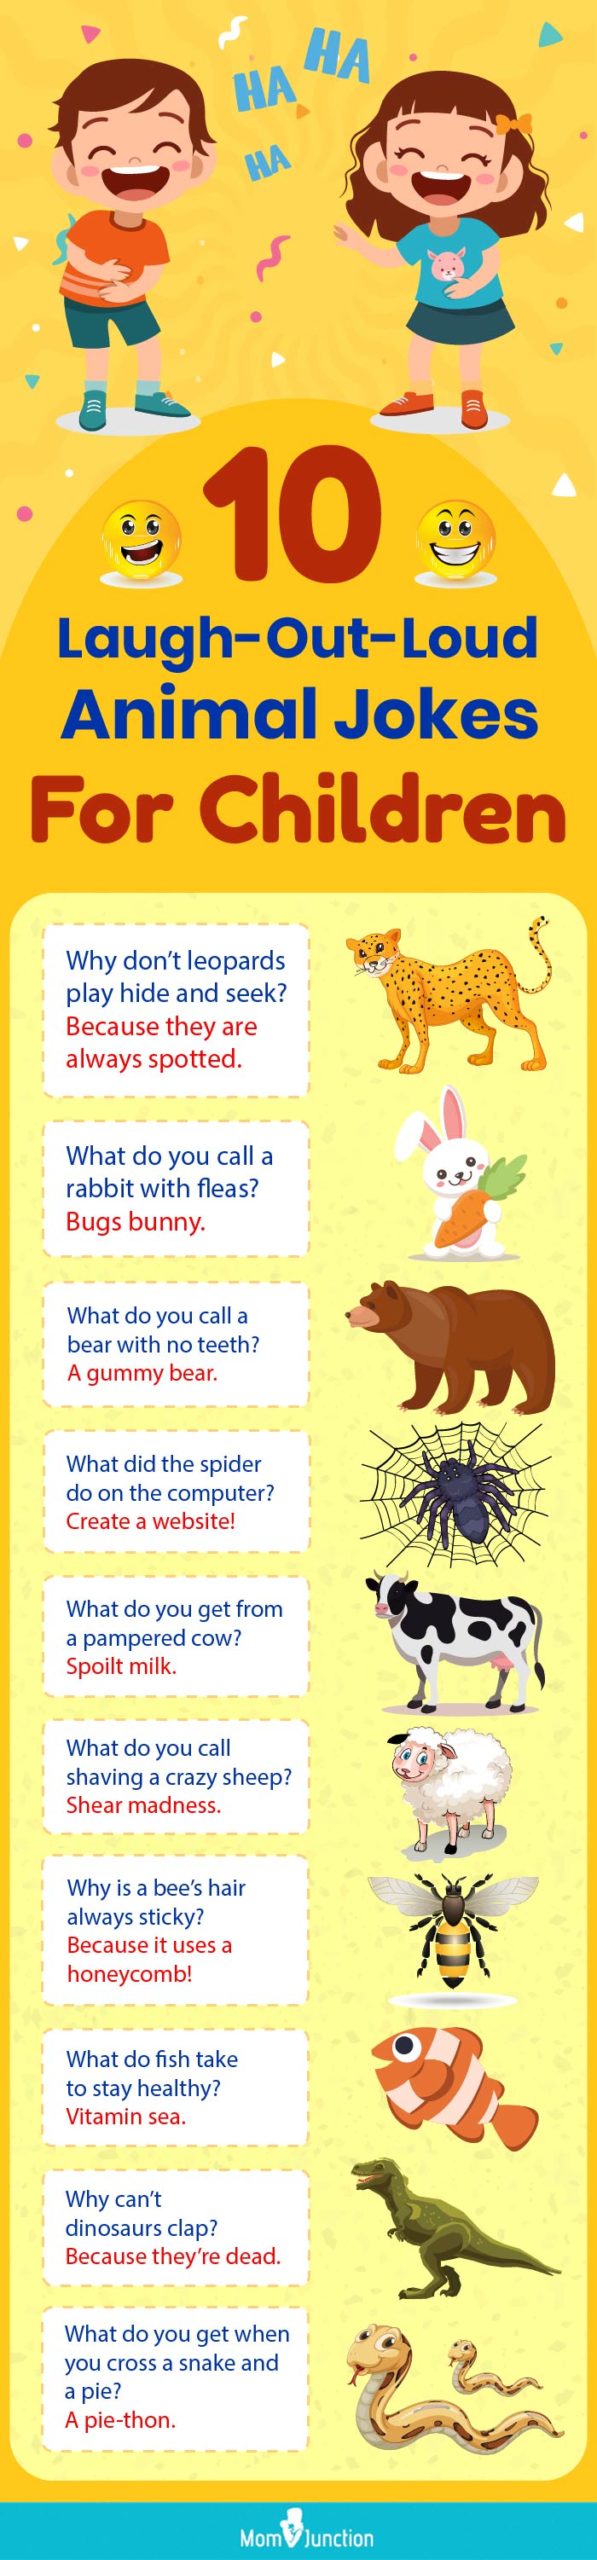 10 laugh out loud animal jokes for children (infographic)